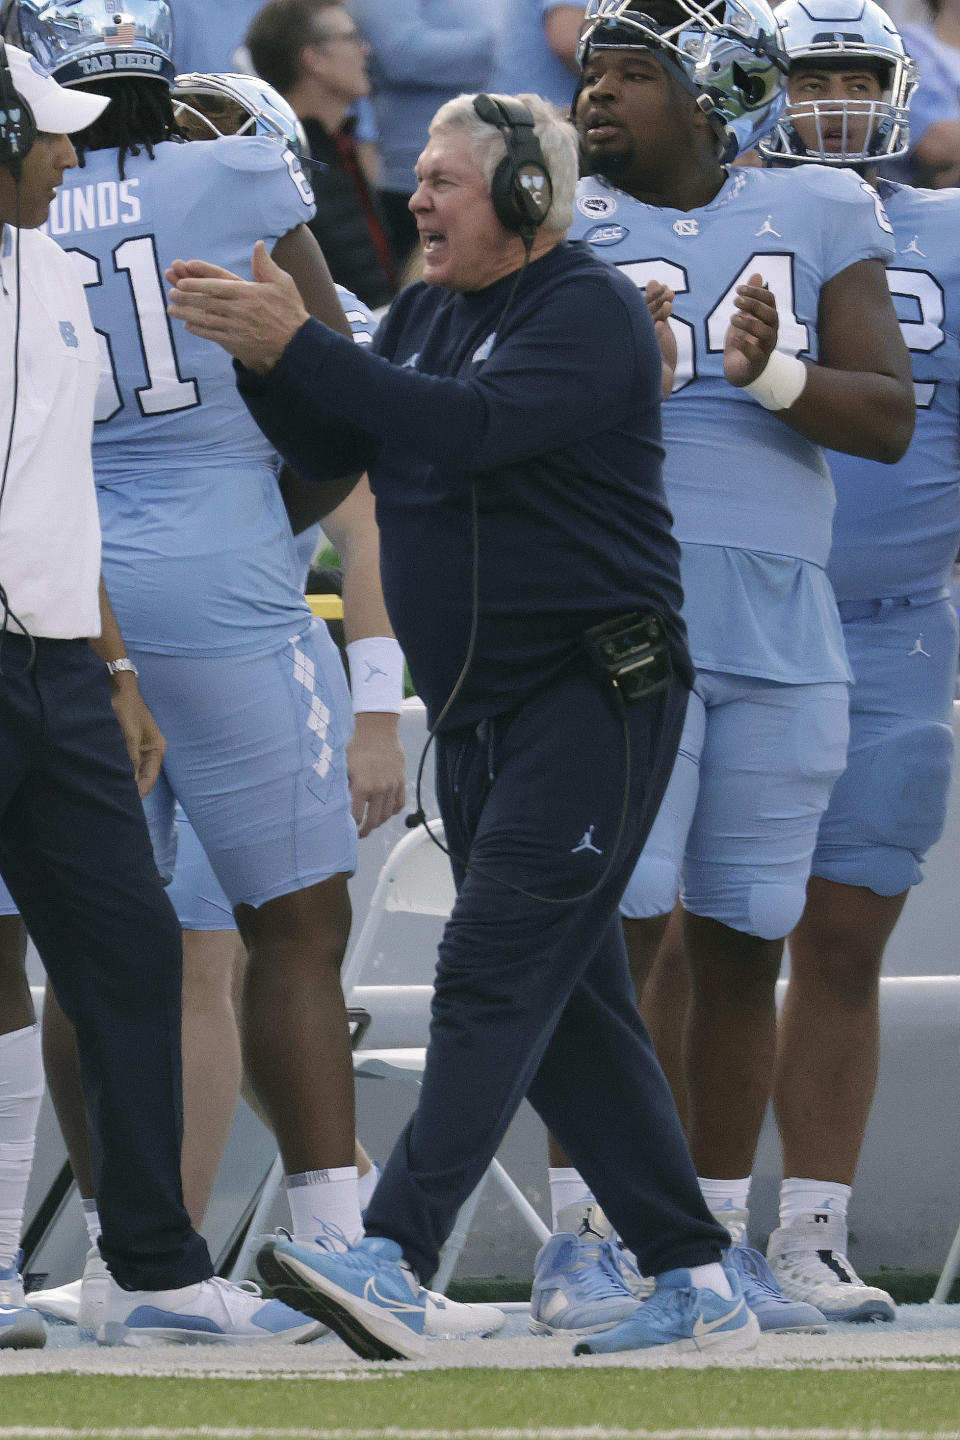 North Carolina head coach Mack Brown cheerts his players after they made a good play during the first half of an NCAA college football game against North Carolina State Friday, Nov. 25, 2022, in Chapel Hill, N.C. (AP Photo/Chris Seward)